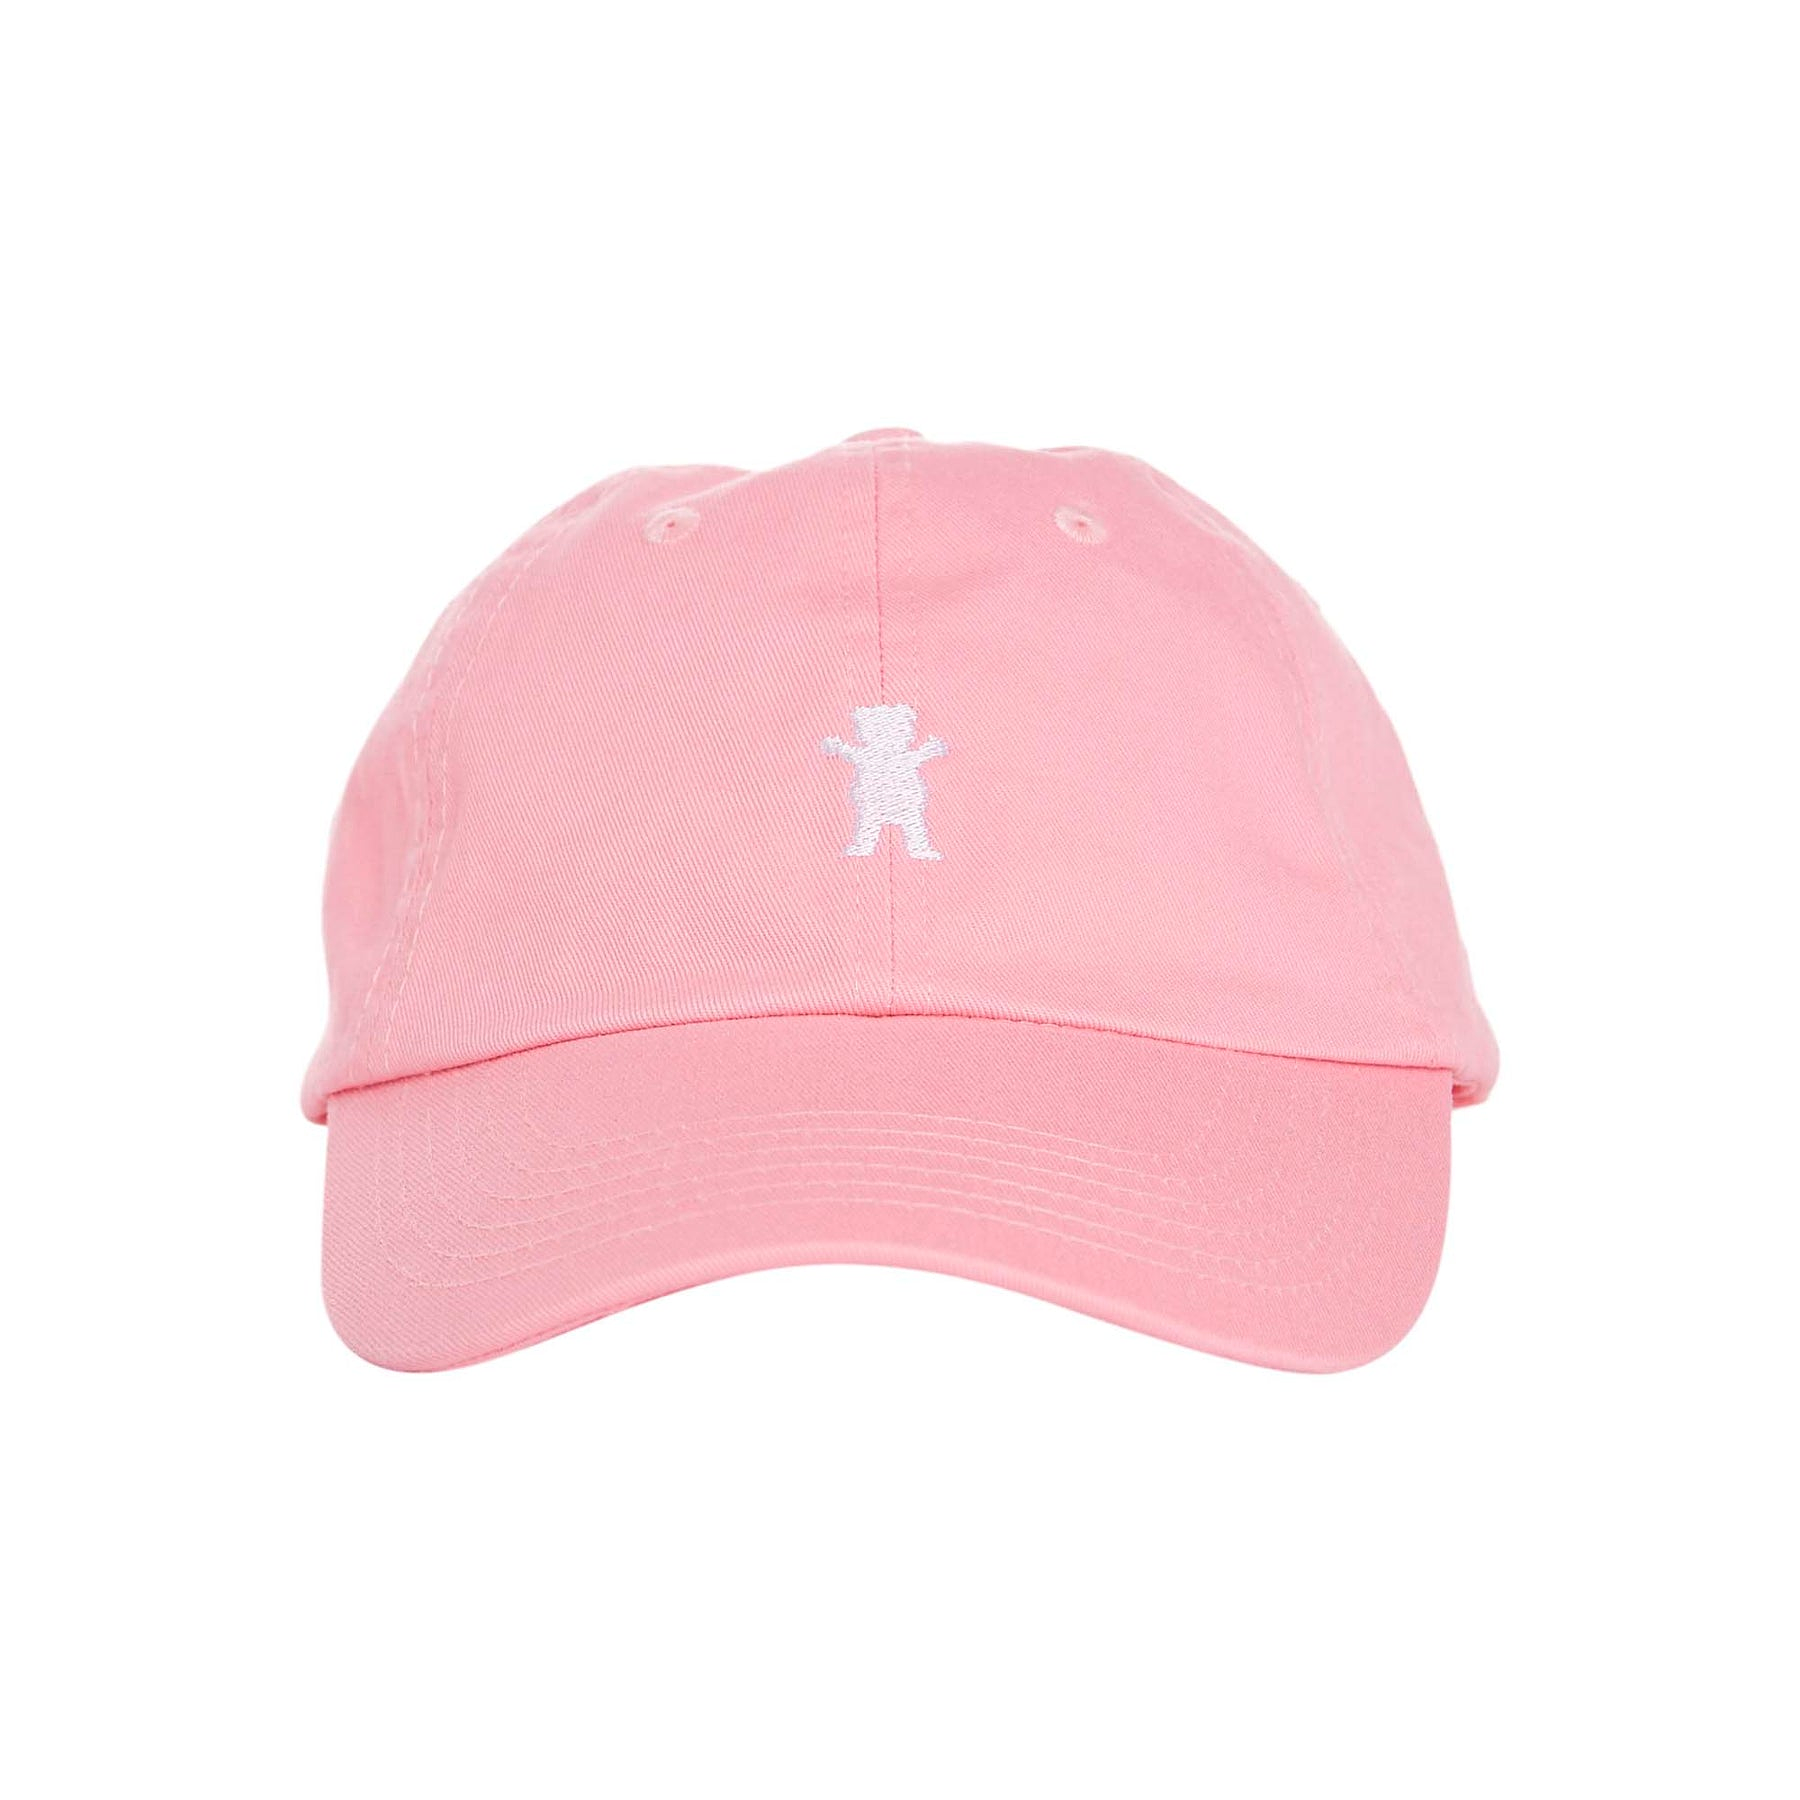 Jockey GRIZZLY HAT IN PINK